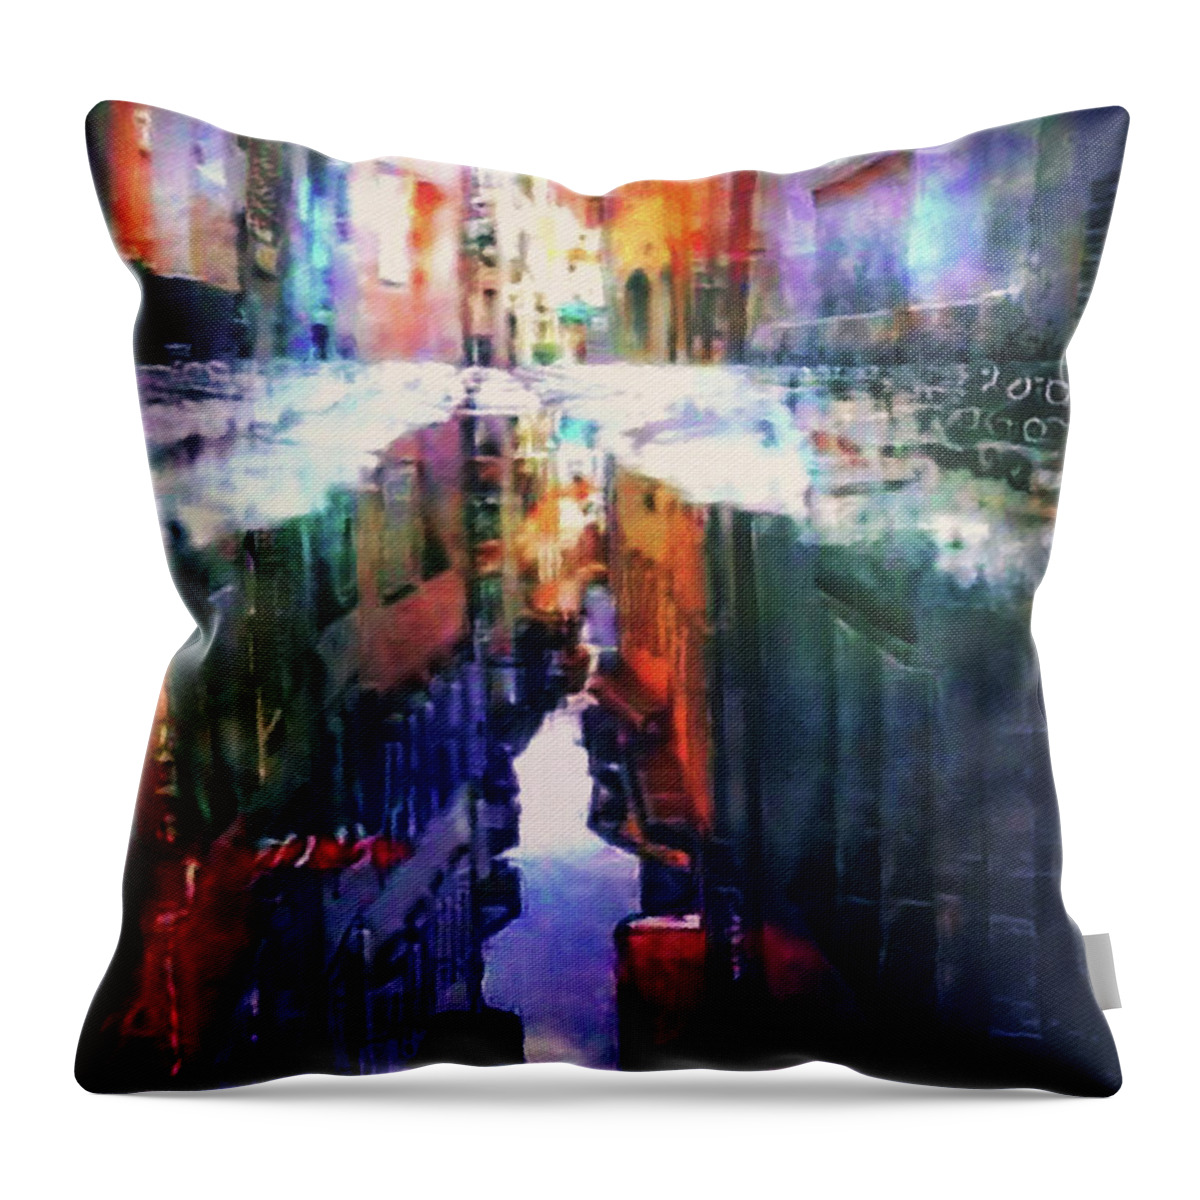 Reflecting On A Rainy Day Throw Pillow featuring the digital art Reflecting on a Rainy Day by Susan Maxwell Schmidt